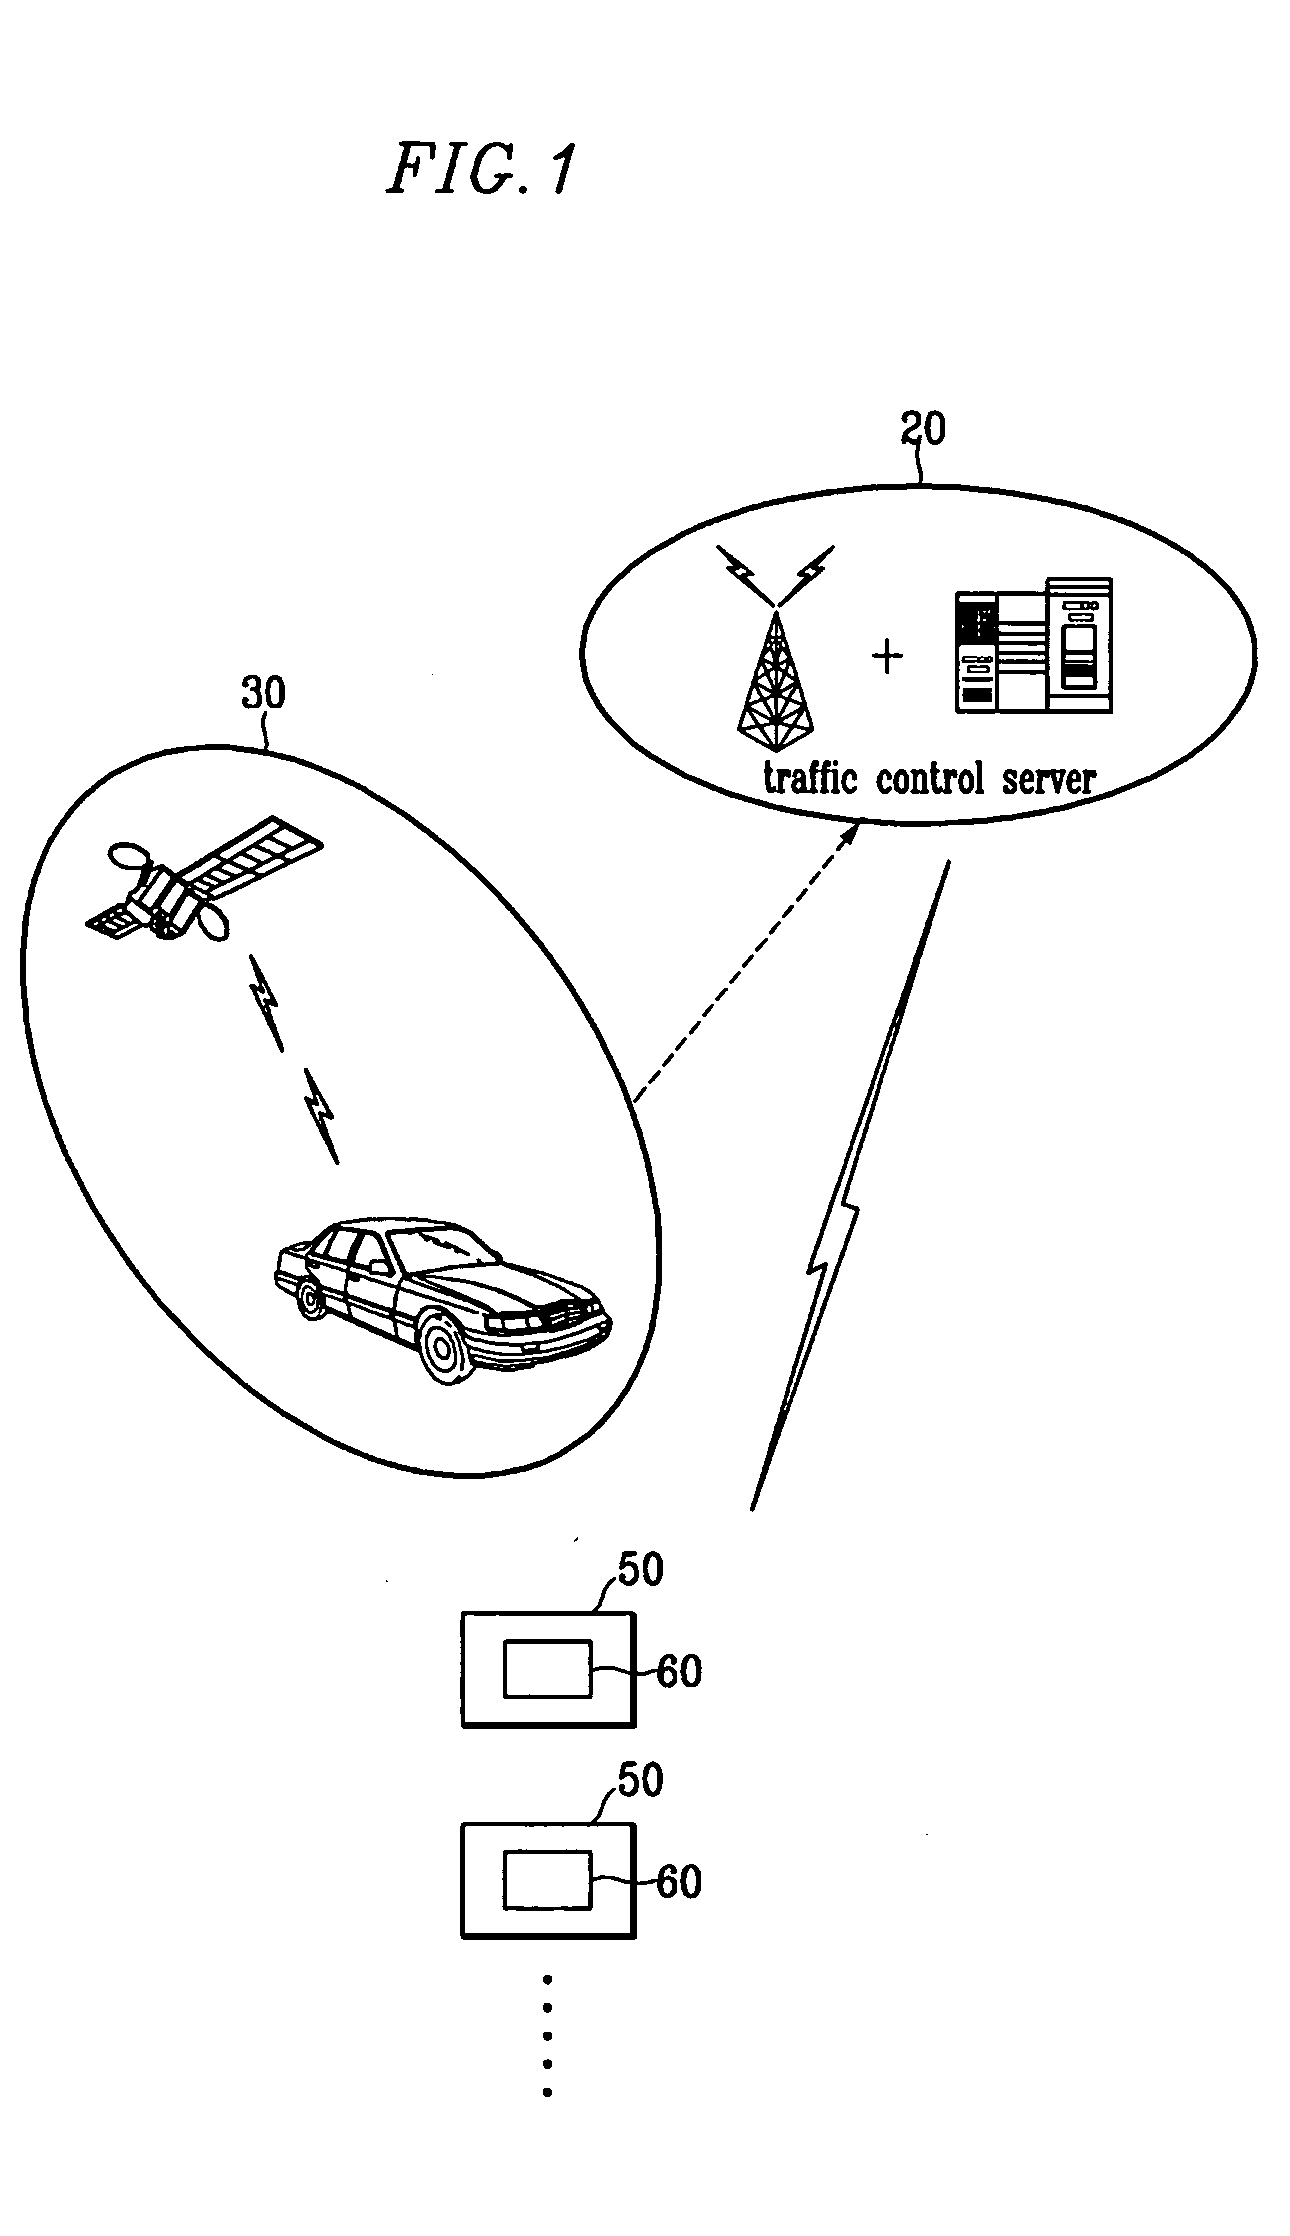 Method for determining traffic conditions